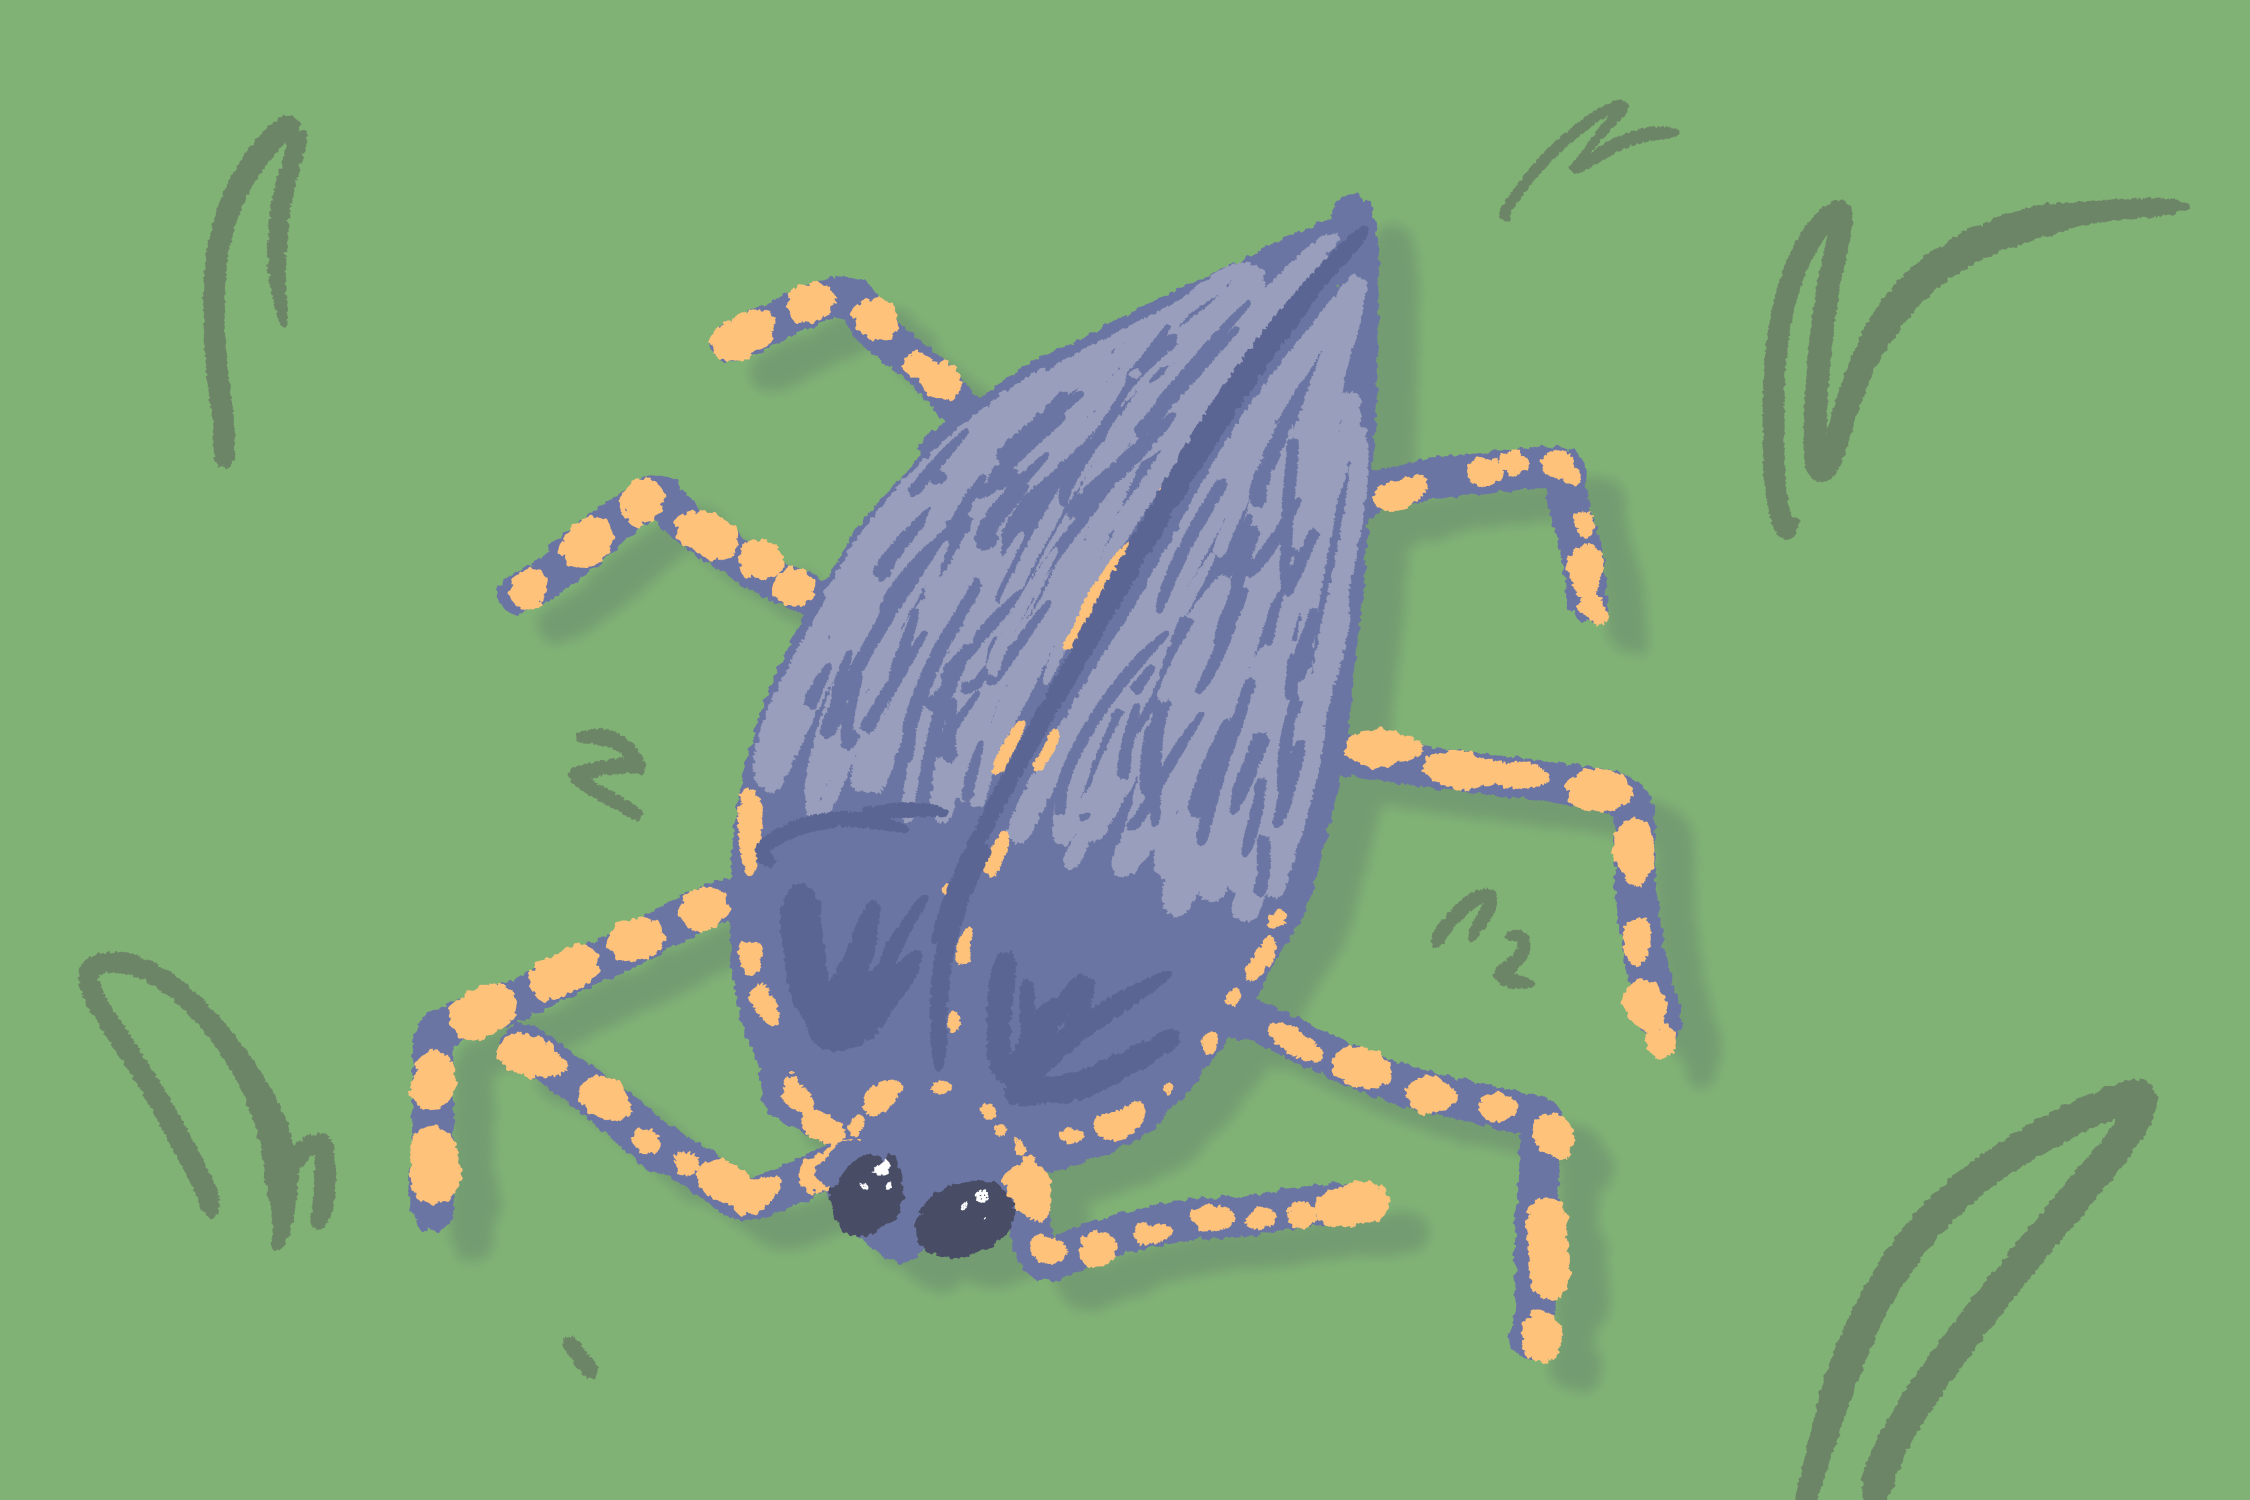 Drawing of an interesting beetle I saw one day but could not ID